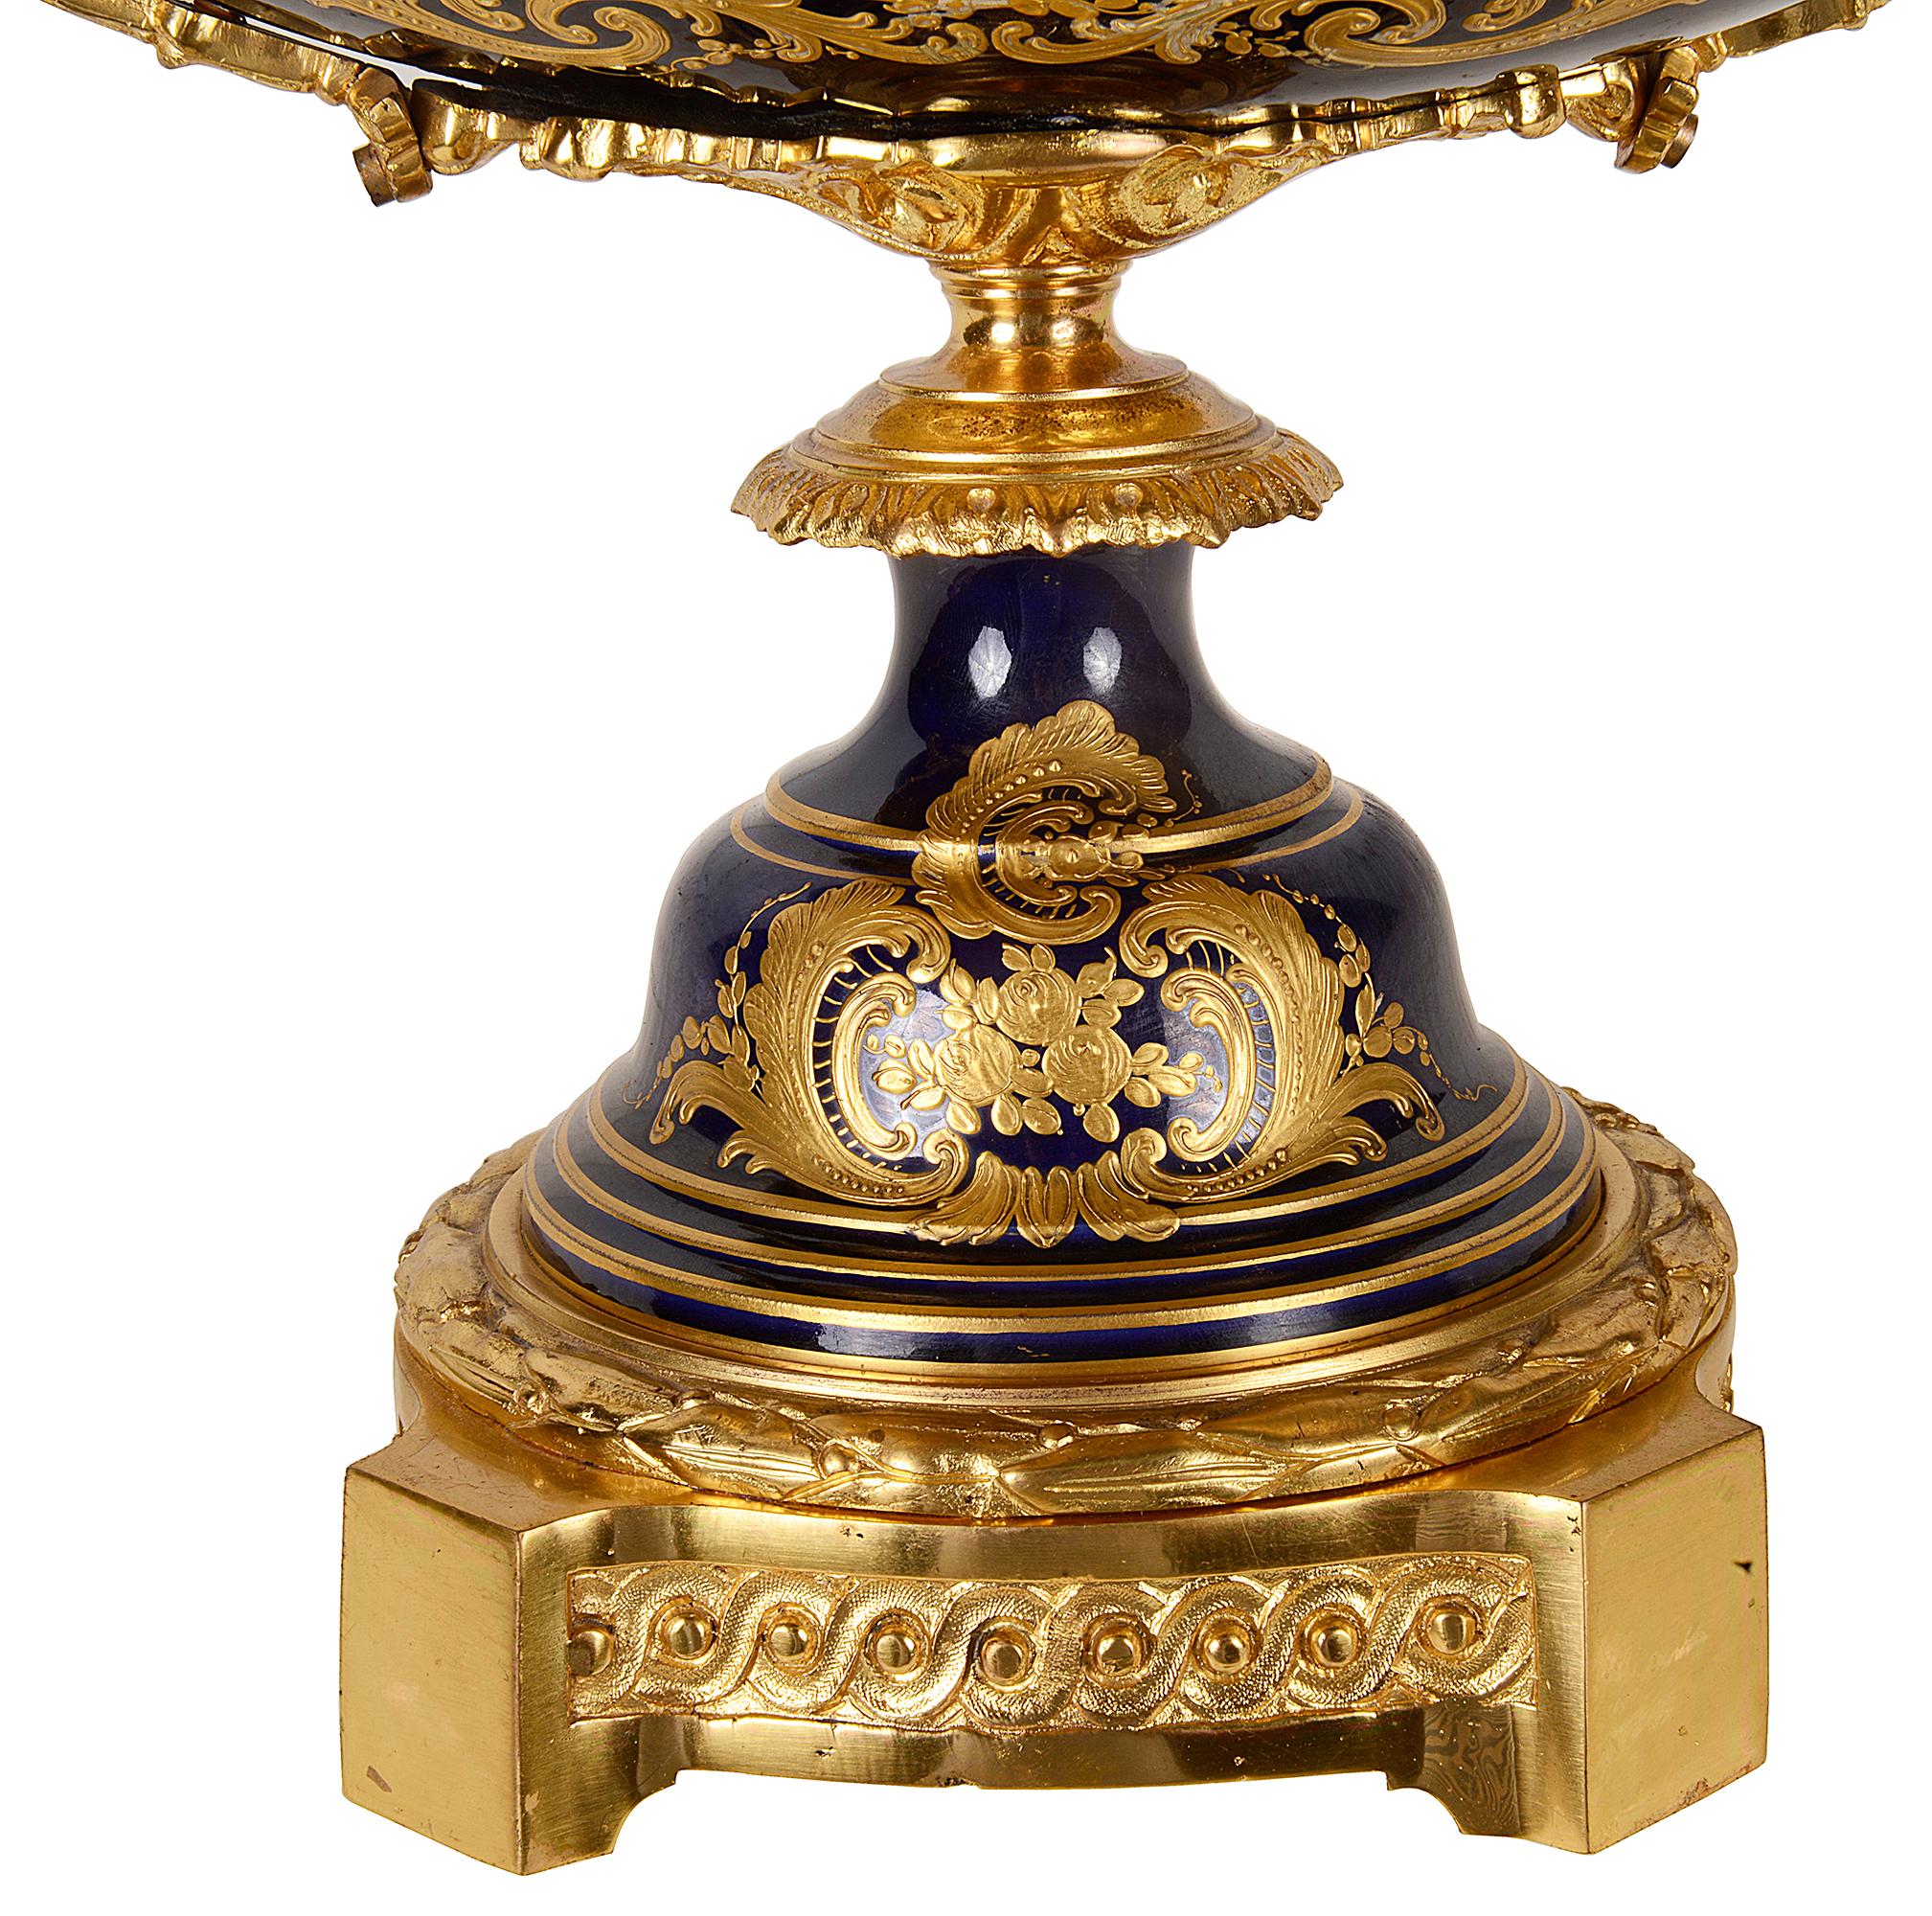 A very impressive, good quality late 19th century French Sevres style porcelain comport. Having wonderful twin gilded ormolu monopodia handles, a pierced scrolling foliate gallery. Cobalt blue ground with gilded classical decoration surrounding an